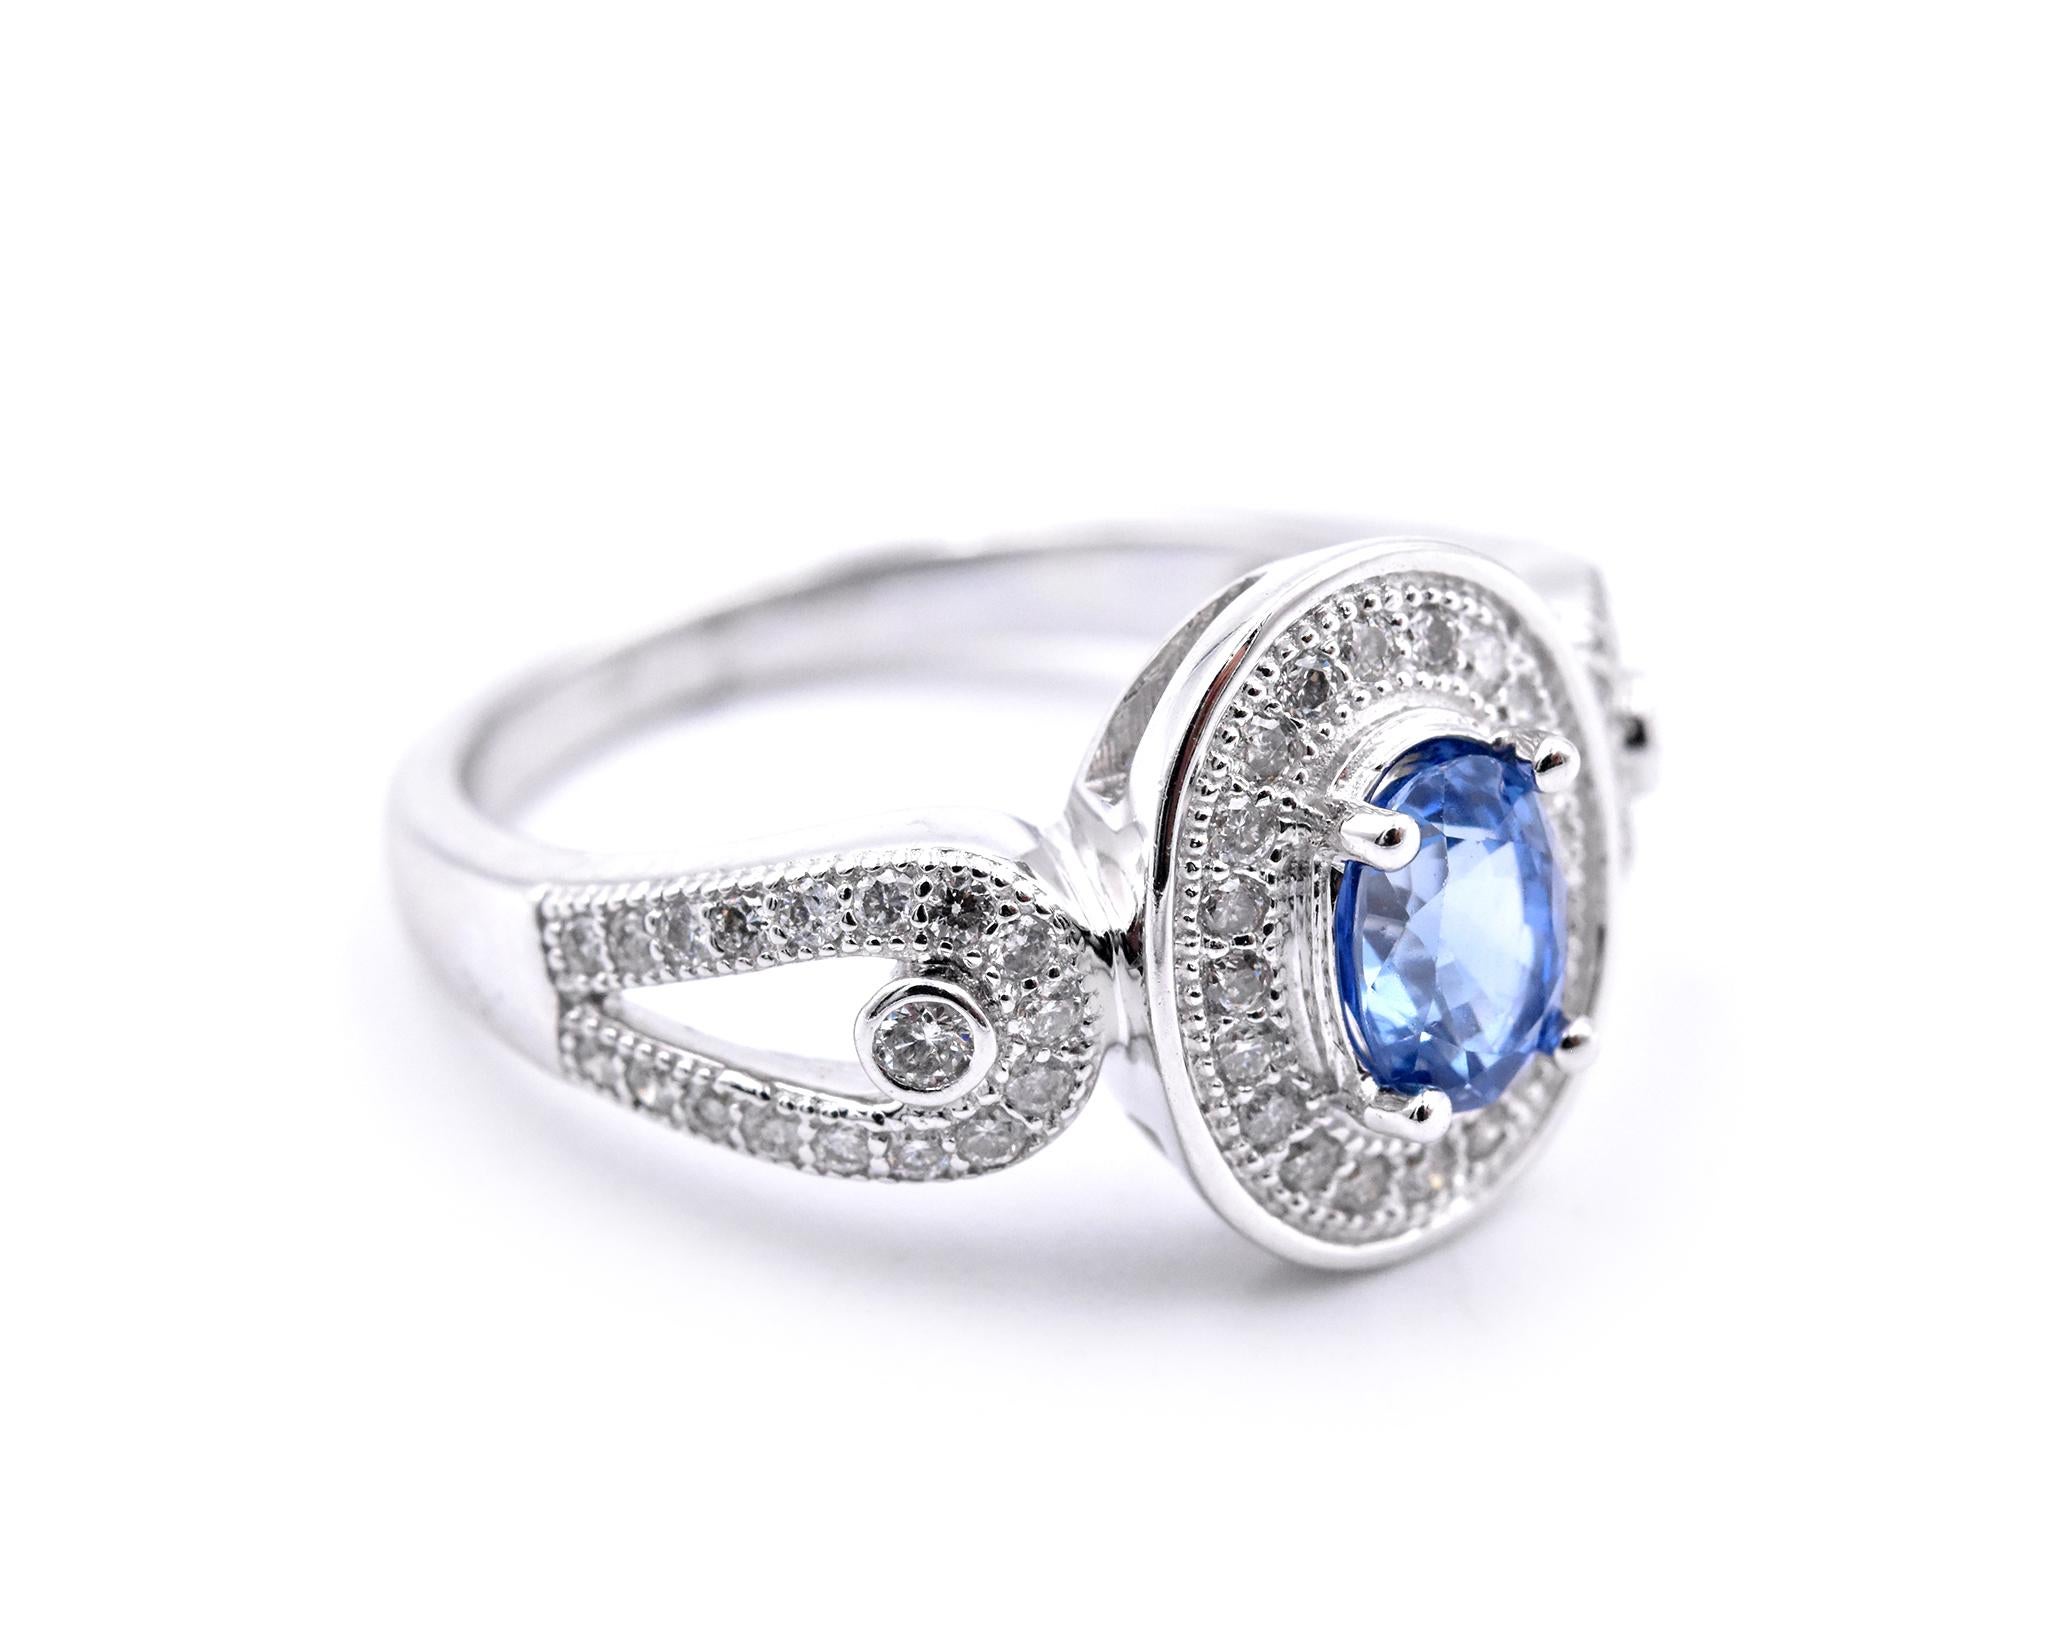 Material: 14 karat white gold
Gemstones: sapphire = .91ct Ceylon Oval Cut
Diamonds: .49cttw
Color: F
Clarity:  VS2-SI
Ring Size: 7.5 (please allow two additional shipping days for sizing requests)
Dimensions: ring top measures 12.67mm  X 10.48mm